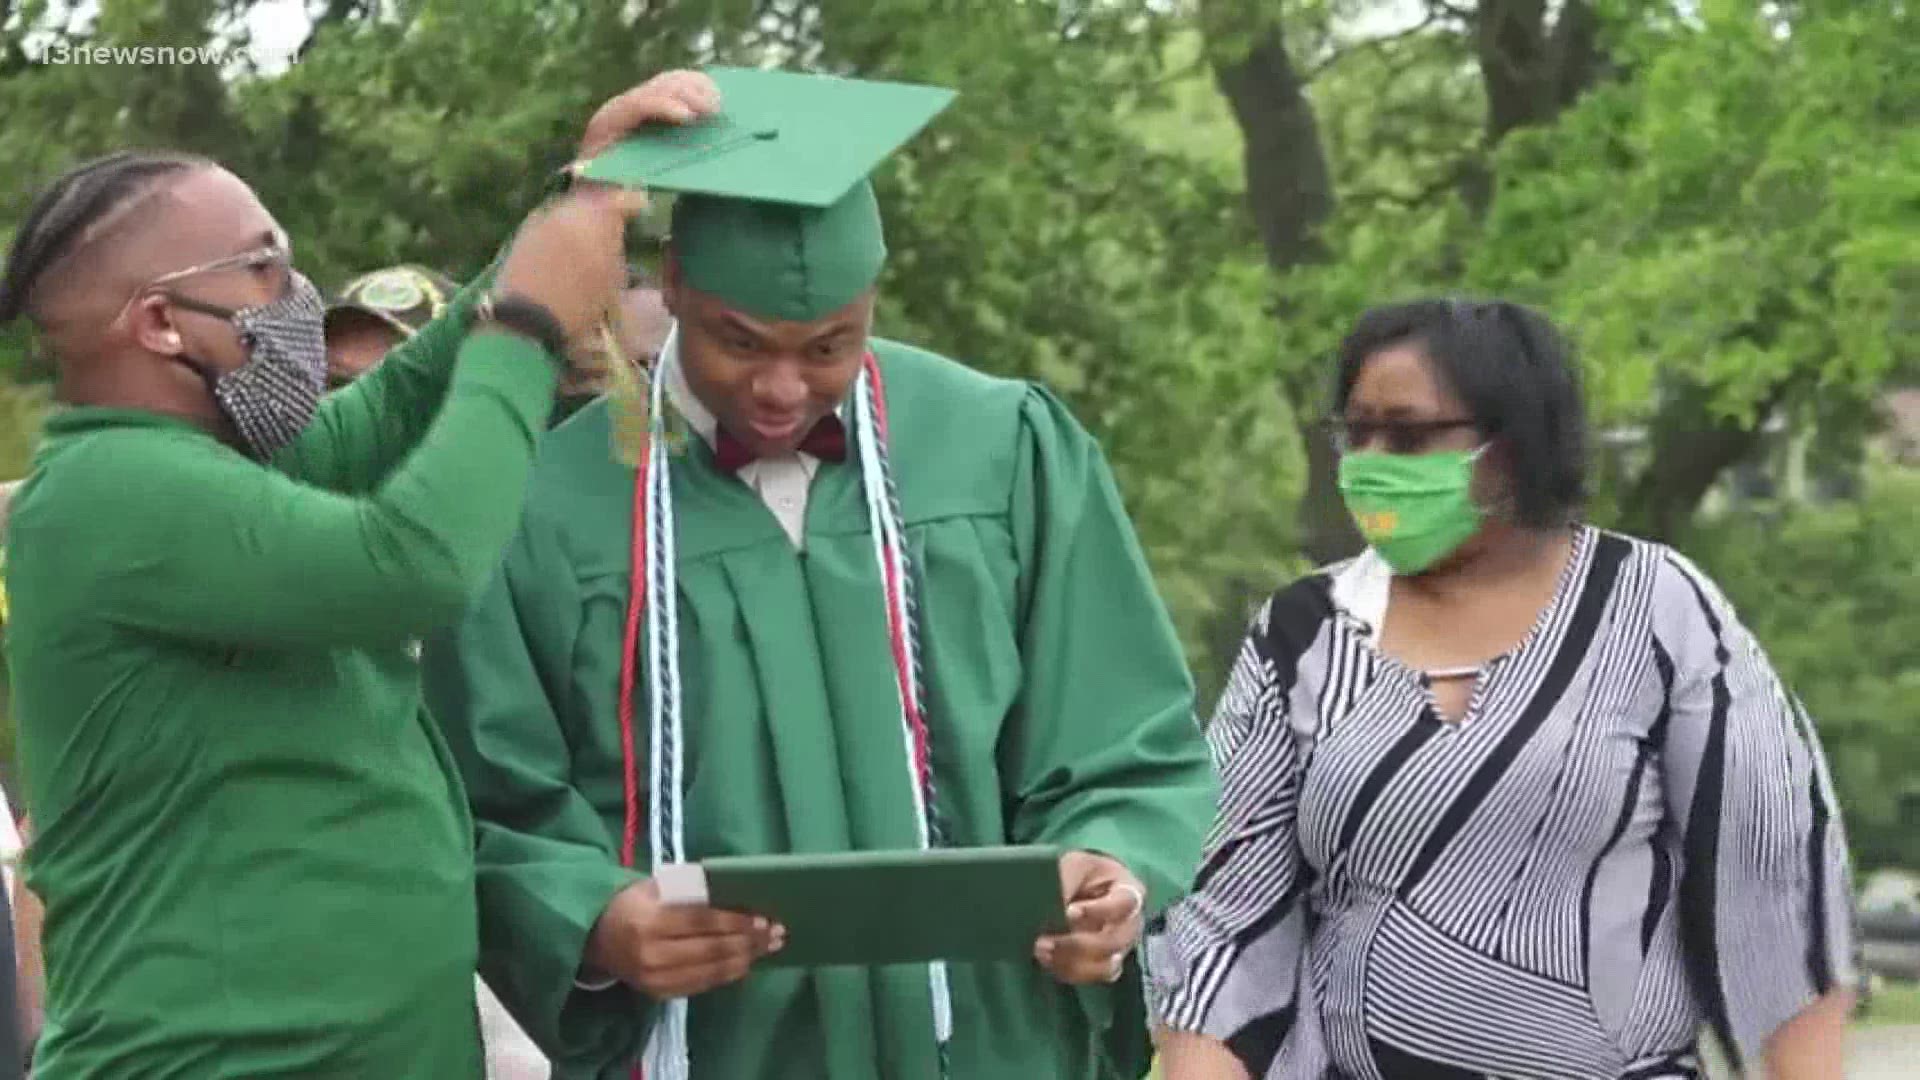 William & Mary 2020 graduates had their graduation ceremony canceled in 2020. As 13News Now Anne Sparaco explains, they might have to wait until 2022 for a ceremony.